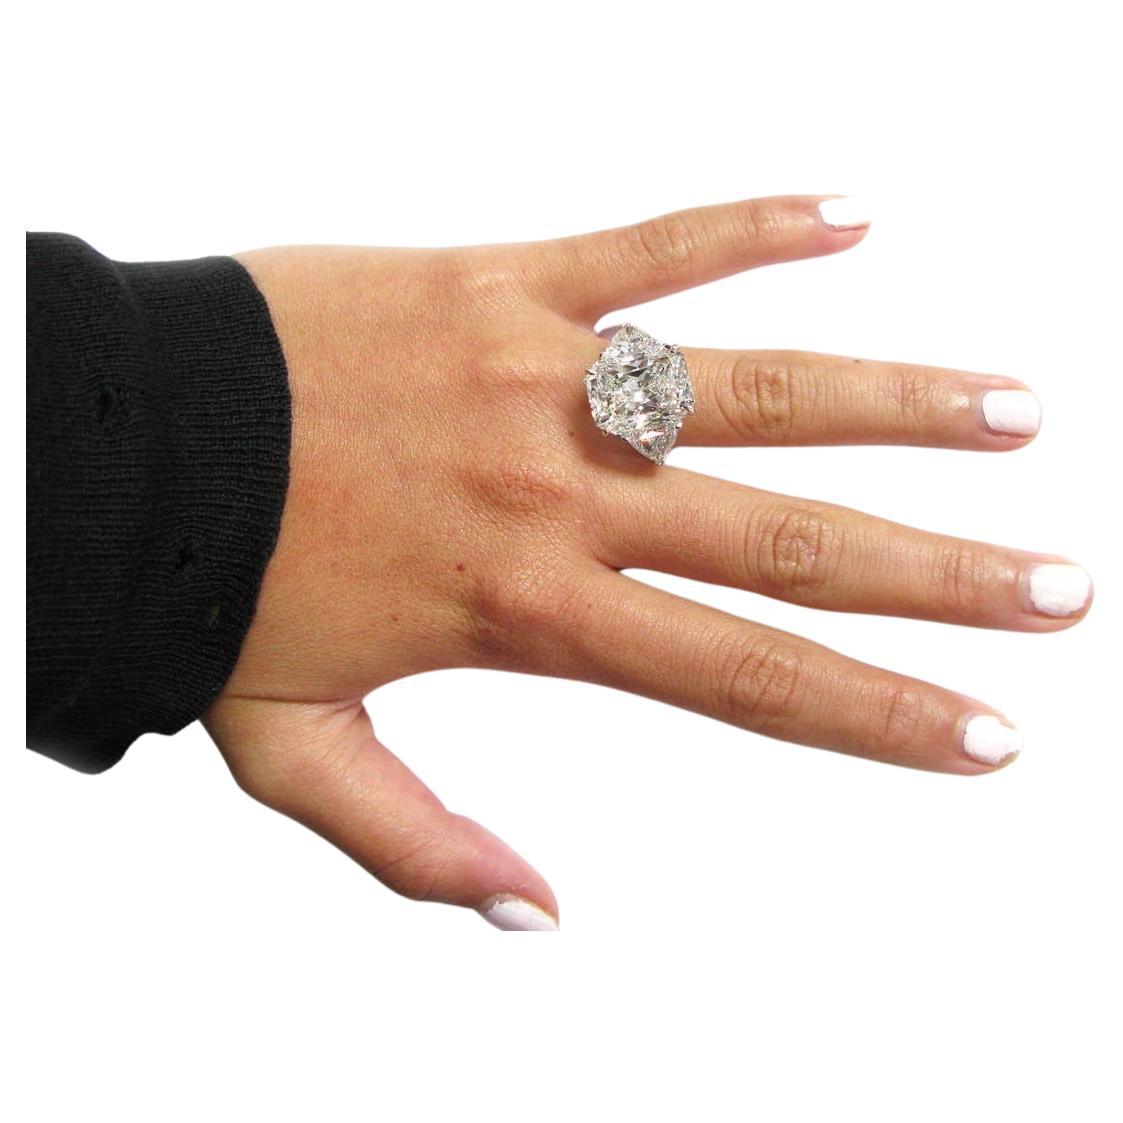 An exquisite brilliant cushion diamond with two tapered baguette diamonds and is mounted in solid platinum the total carat amount is 1.50 carats
the main stone weight is 10 carats
has F Color
vs1 Clarity


